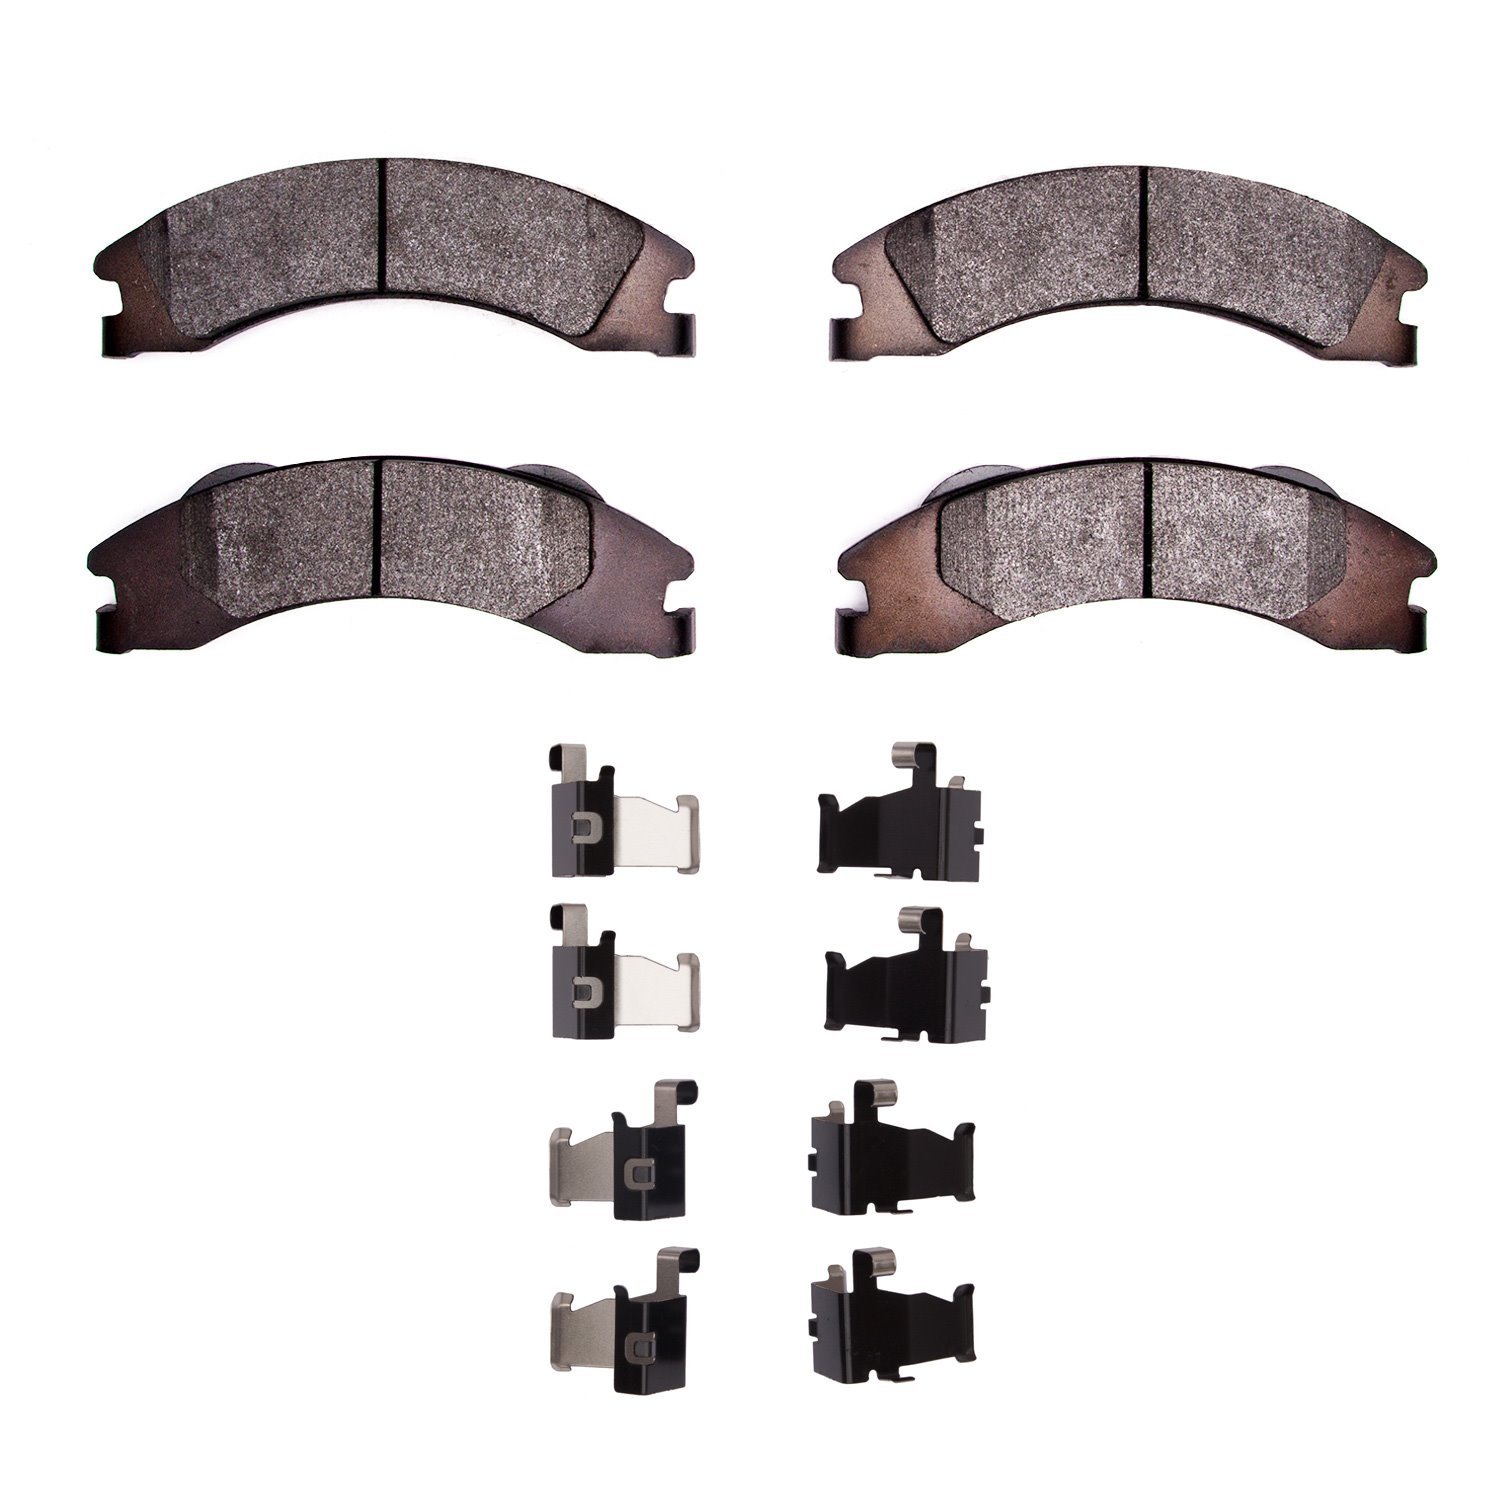 1214-1329-01 Heavy-Duty Brake Pads & Hardware Kit, Fits Select Ford/Lincoln/Mercury/Mazda, Position: Rear